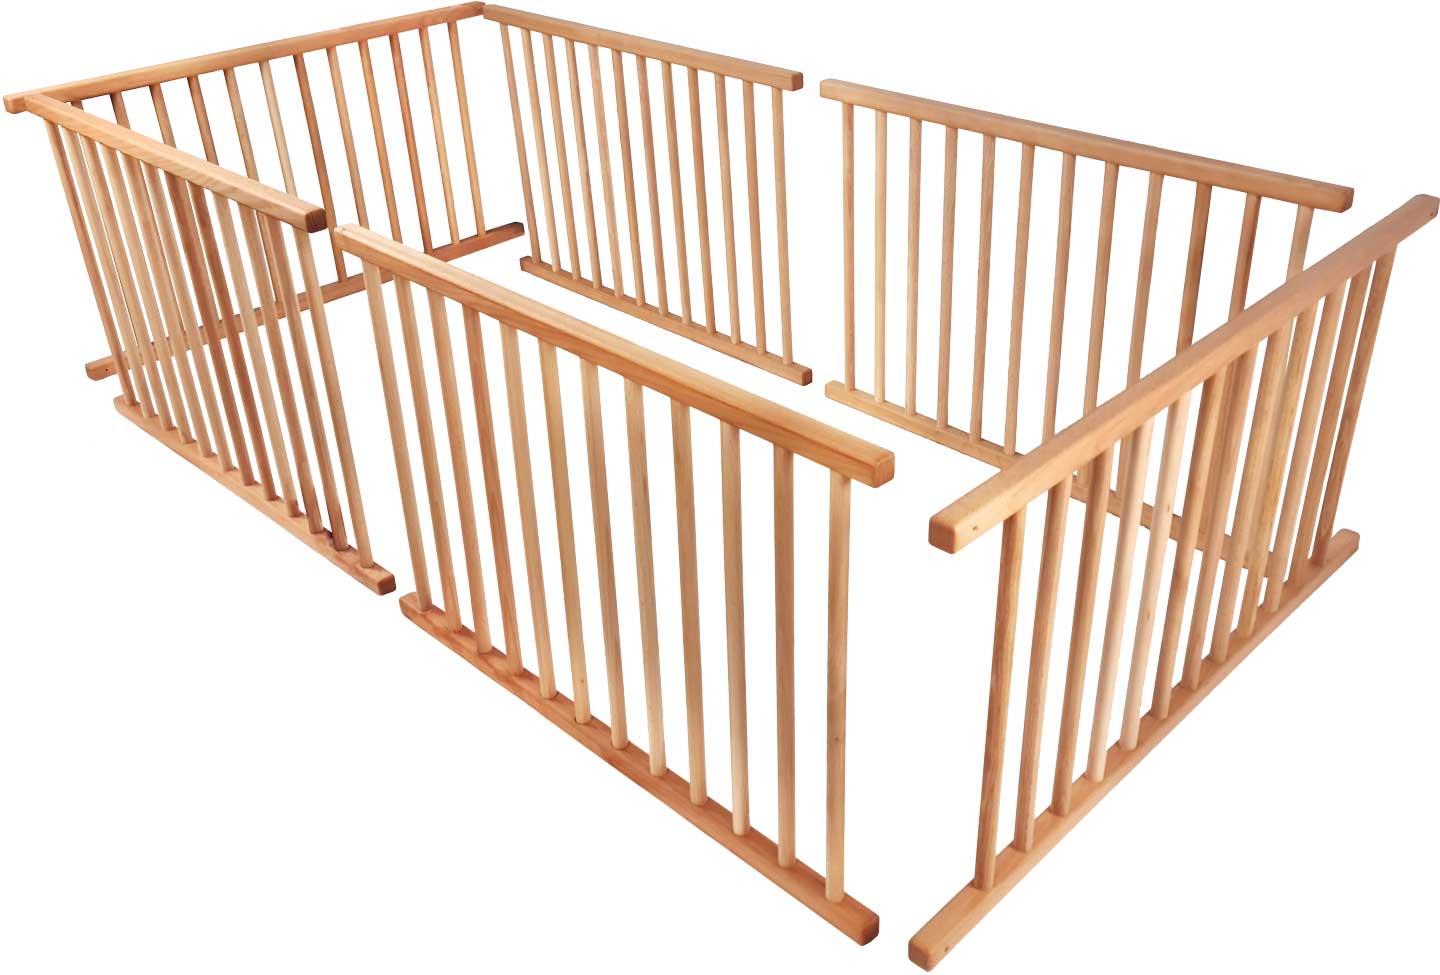 Baby Gate Set for the entire sleeping area (Loft Bed Adjustable by Age, Corner Bunk Bed* or Bunk Bed Laterally Staggered*)